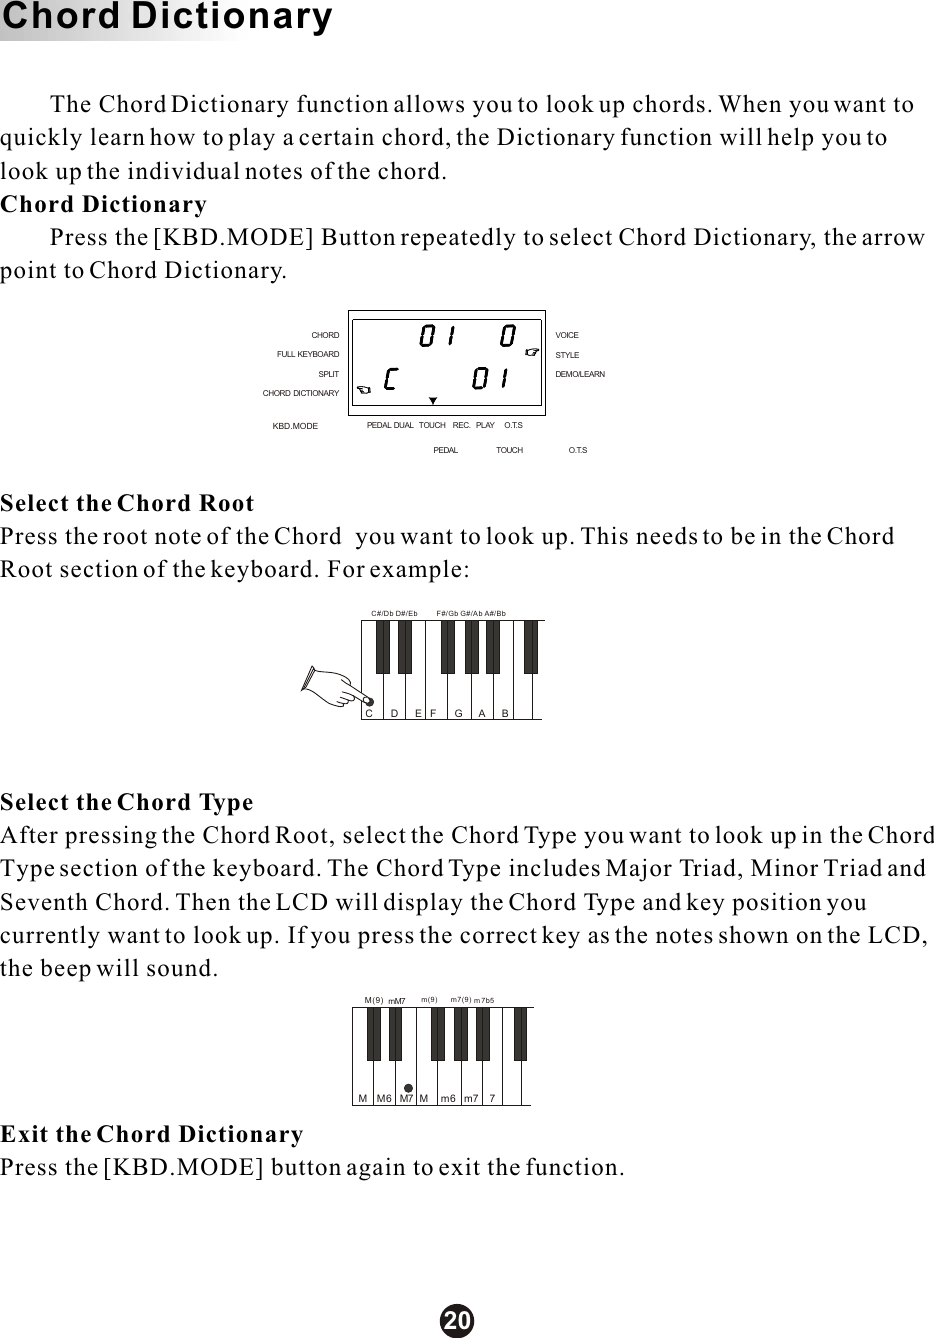 C       mM7       M7       M    DBC#/Db D#/EbEFF#/GbGG#/AbAA#/BbM6m(9)6m7(9)m7m7b5m7M(9)M        The Chord Dictionary function allows you to look up chords. When you want to quickly learn how to play a certain chord, the Dictionary function will help you to look up the individual notes of the chord.Chord Dictionary        Press the [KBD.MODE] Button repeatedly to select Chord Dictionary, the arrow point to Chord Dictionary.  Select the Chord RootPress the root note of the Chord  you want to look up. This needs to be in the Chord Root section of the keyboard. For example:Select the Chord TypeAfter pressing the Chord Root, select the Chord Type you want to look up in the Chord Type section of the keyboard. The Chord Type includes Major Triad, Minor Triad and Seventh Chord. Then the LCD will display the Chord Type and key position you currently want to look up. If you press the correct key as the notes shown on the LCD, the beep will sound. Exit the Chord DictionaryPress the [KBD.MODE] button again to exit the function.Chord DictionaryKBD.MODECHORDSPLITFULL KEYBOARDCHORD DICTIONARYSTYLEVOICEDEMO/LEARNPEDAL DUAL TOUCH REC. PLAY O.T.SPEDAL TOUCH O.T.S20